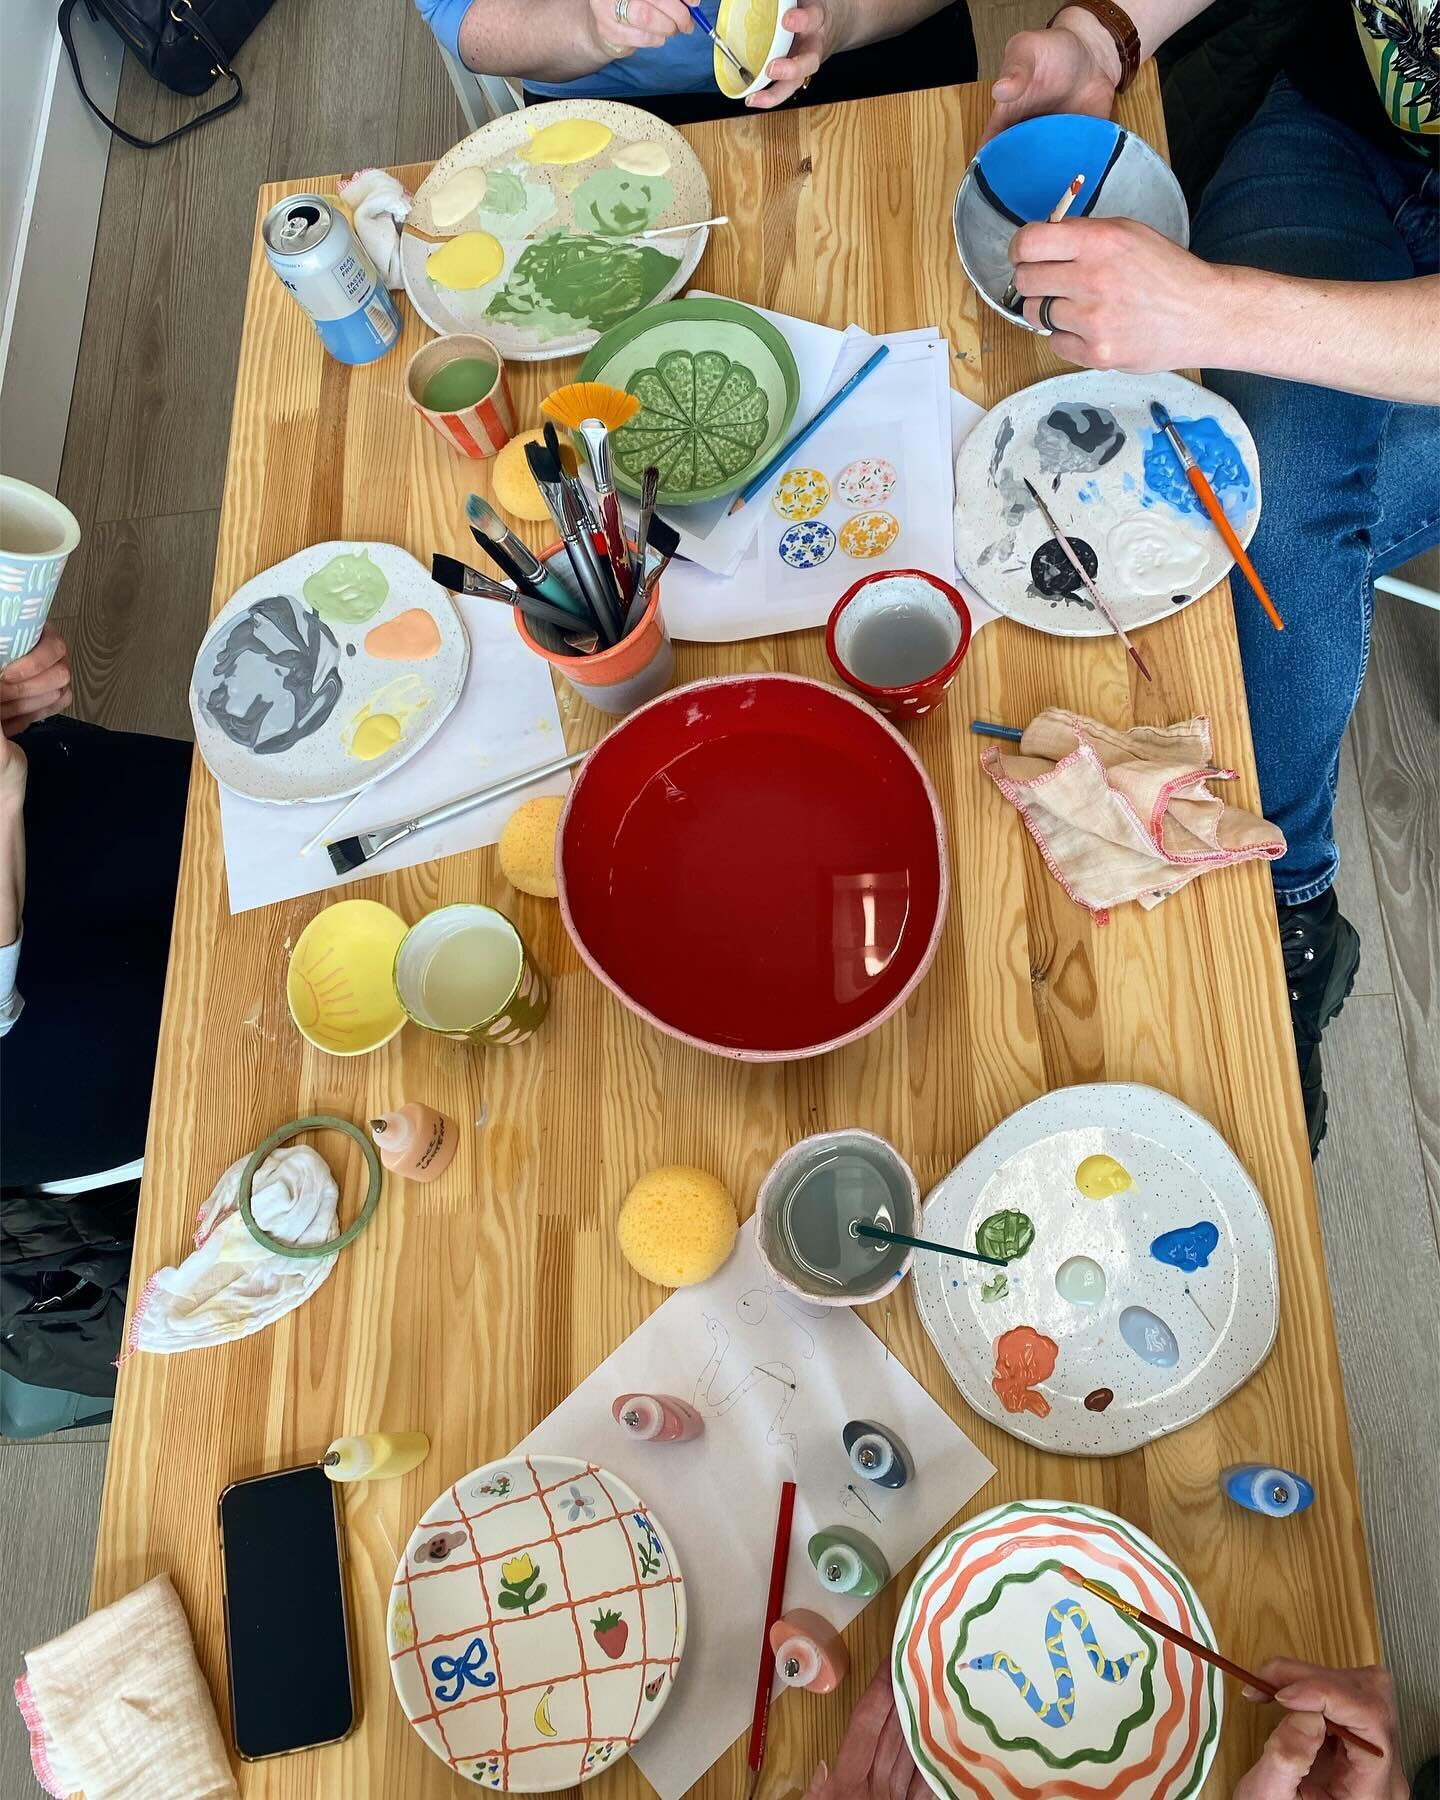 What a Sunday! Thanks for painting with me! I hope we can do it again very soon! 

#potterypainting #sundayfunday #thingstodoinboston #bostonma #potterypopup #artworkshop